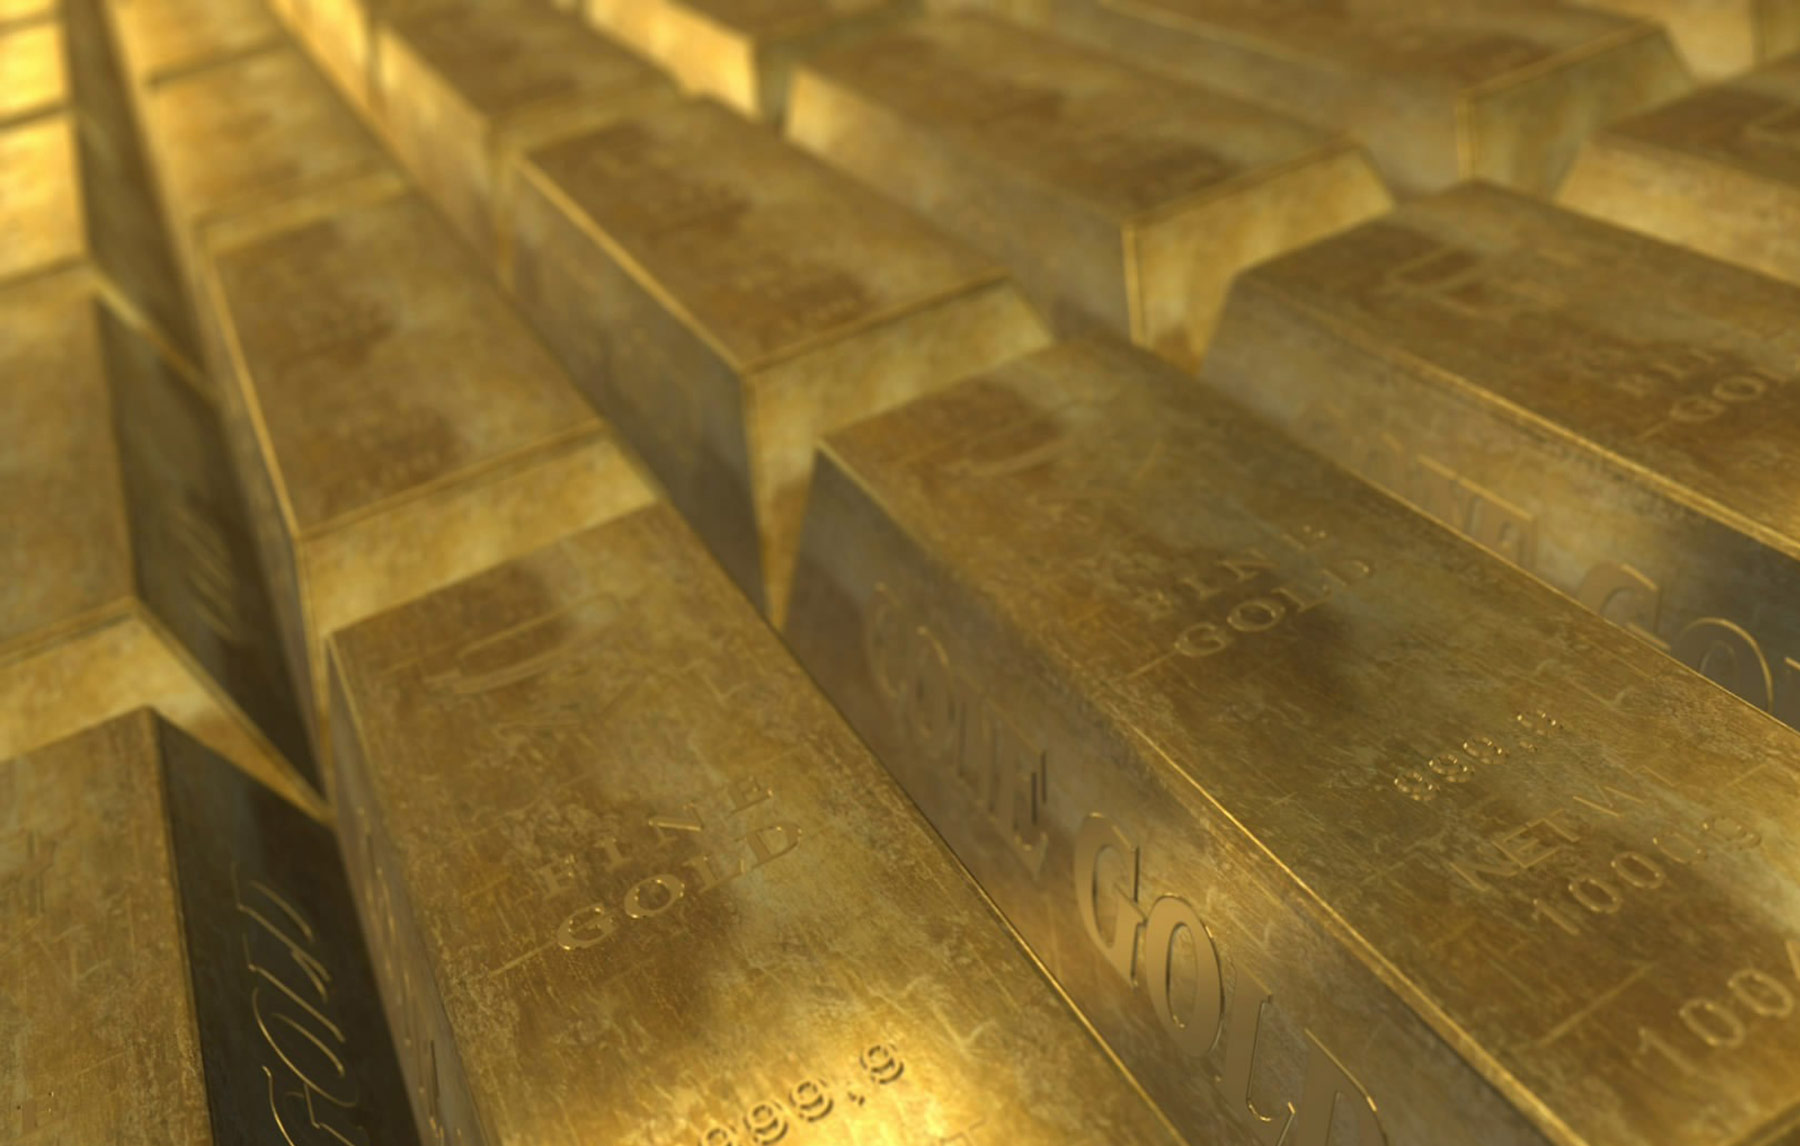 Rows of Large Fine Gold Bars